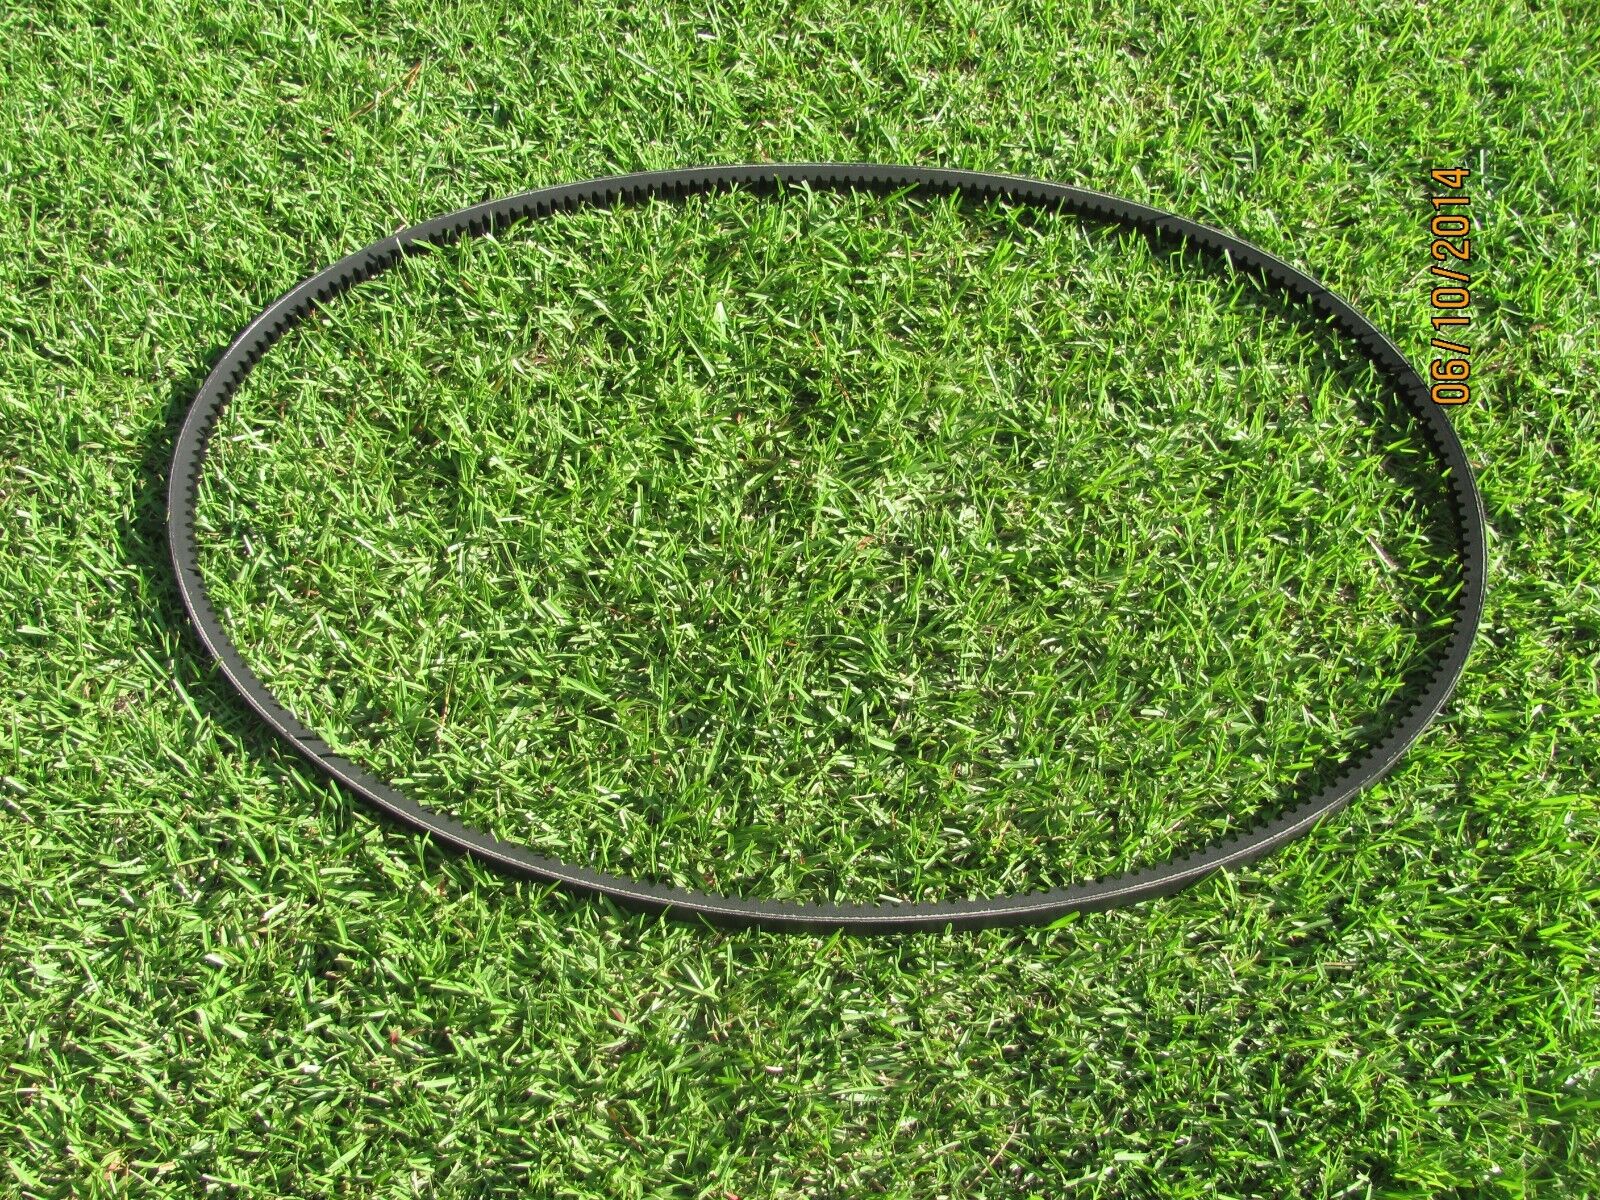 1 REPLACEMENT BELT FOR BEFCO C30-RD4 FOR 4' MOWERS- BEFCO 000-8630 PART #